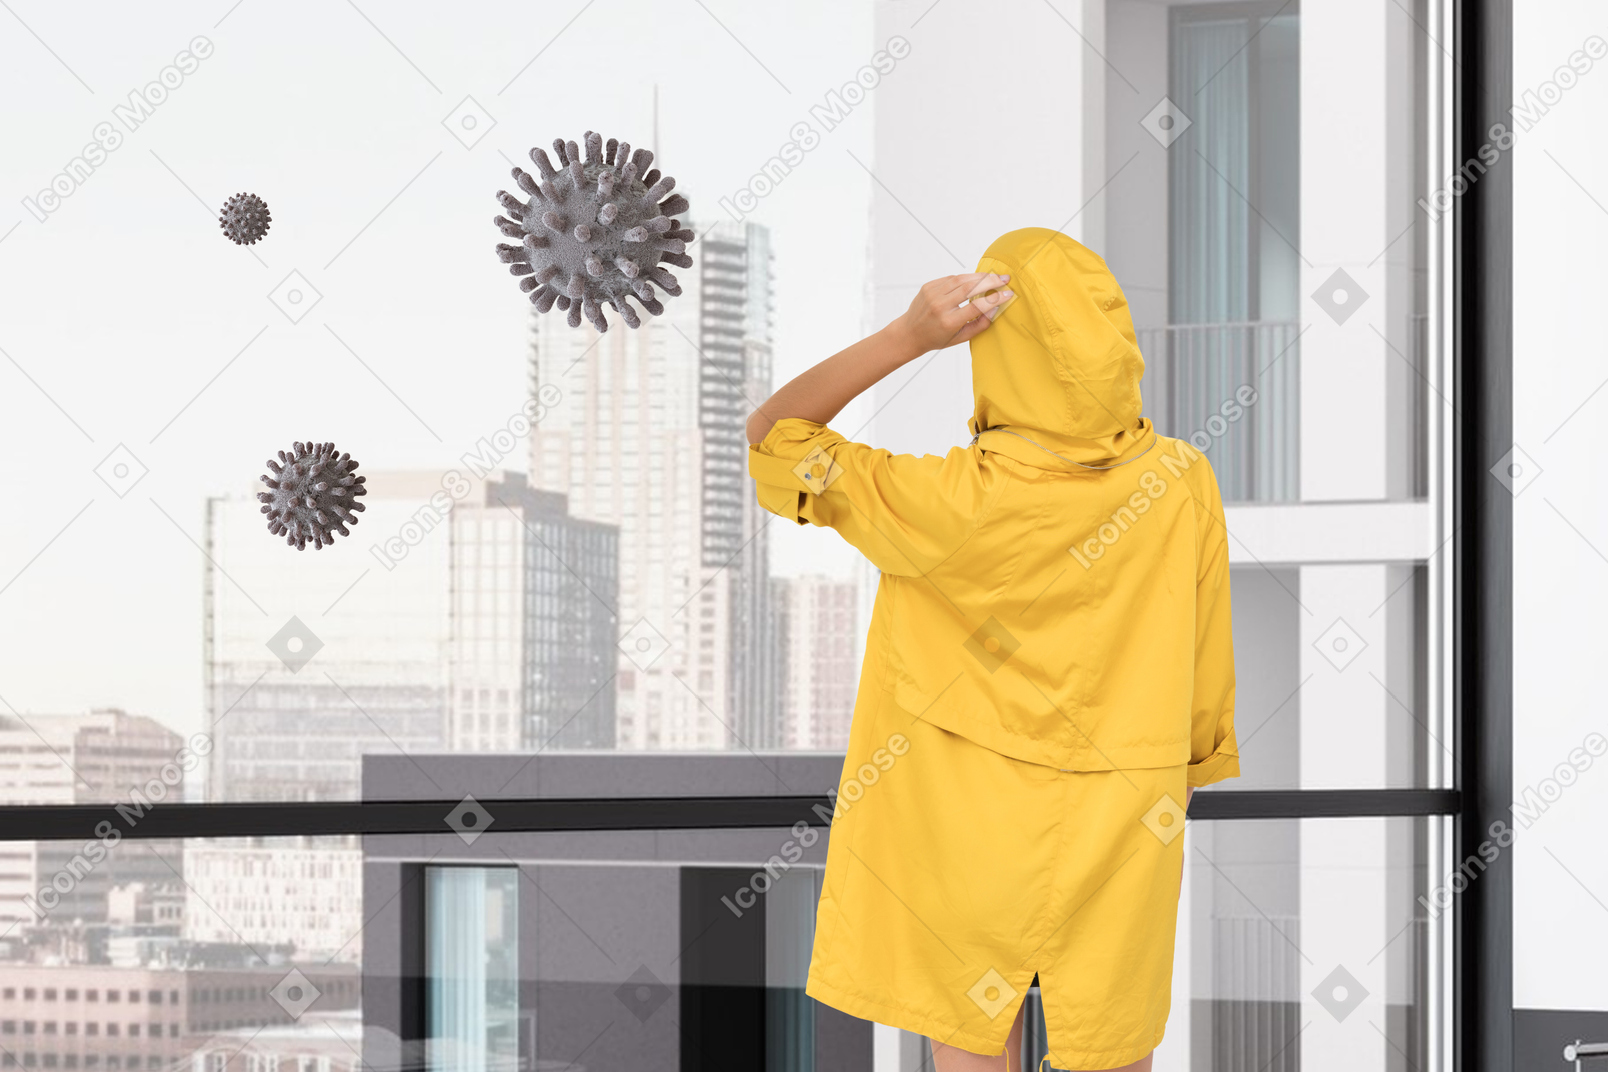 Person standing on a balcony and looking out with coronavirus in the air